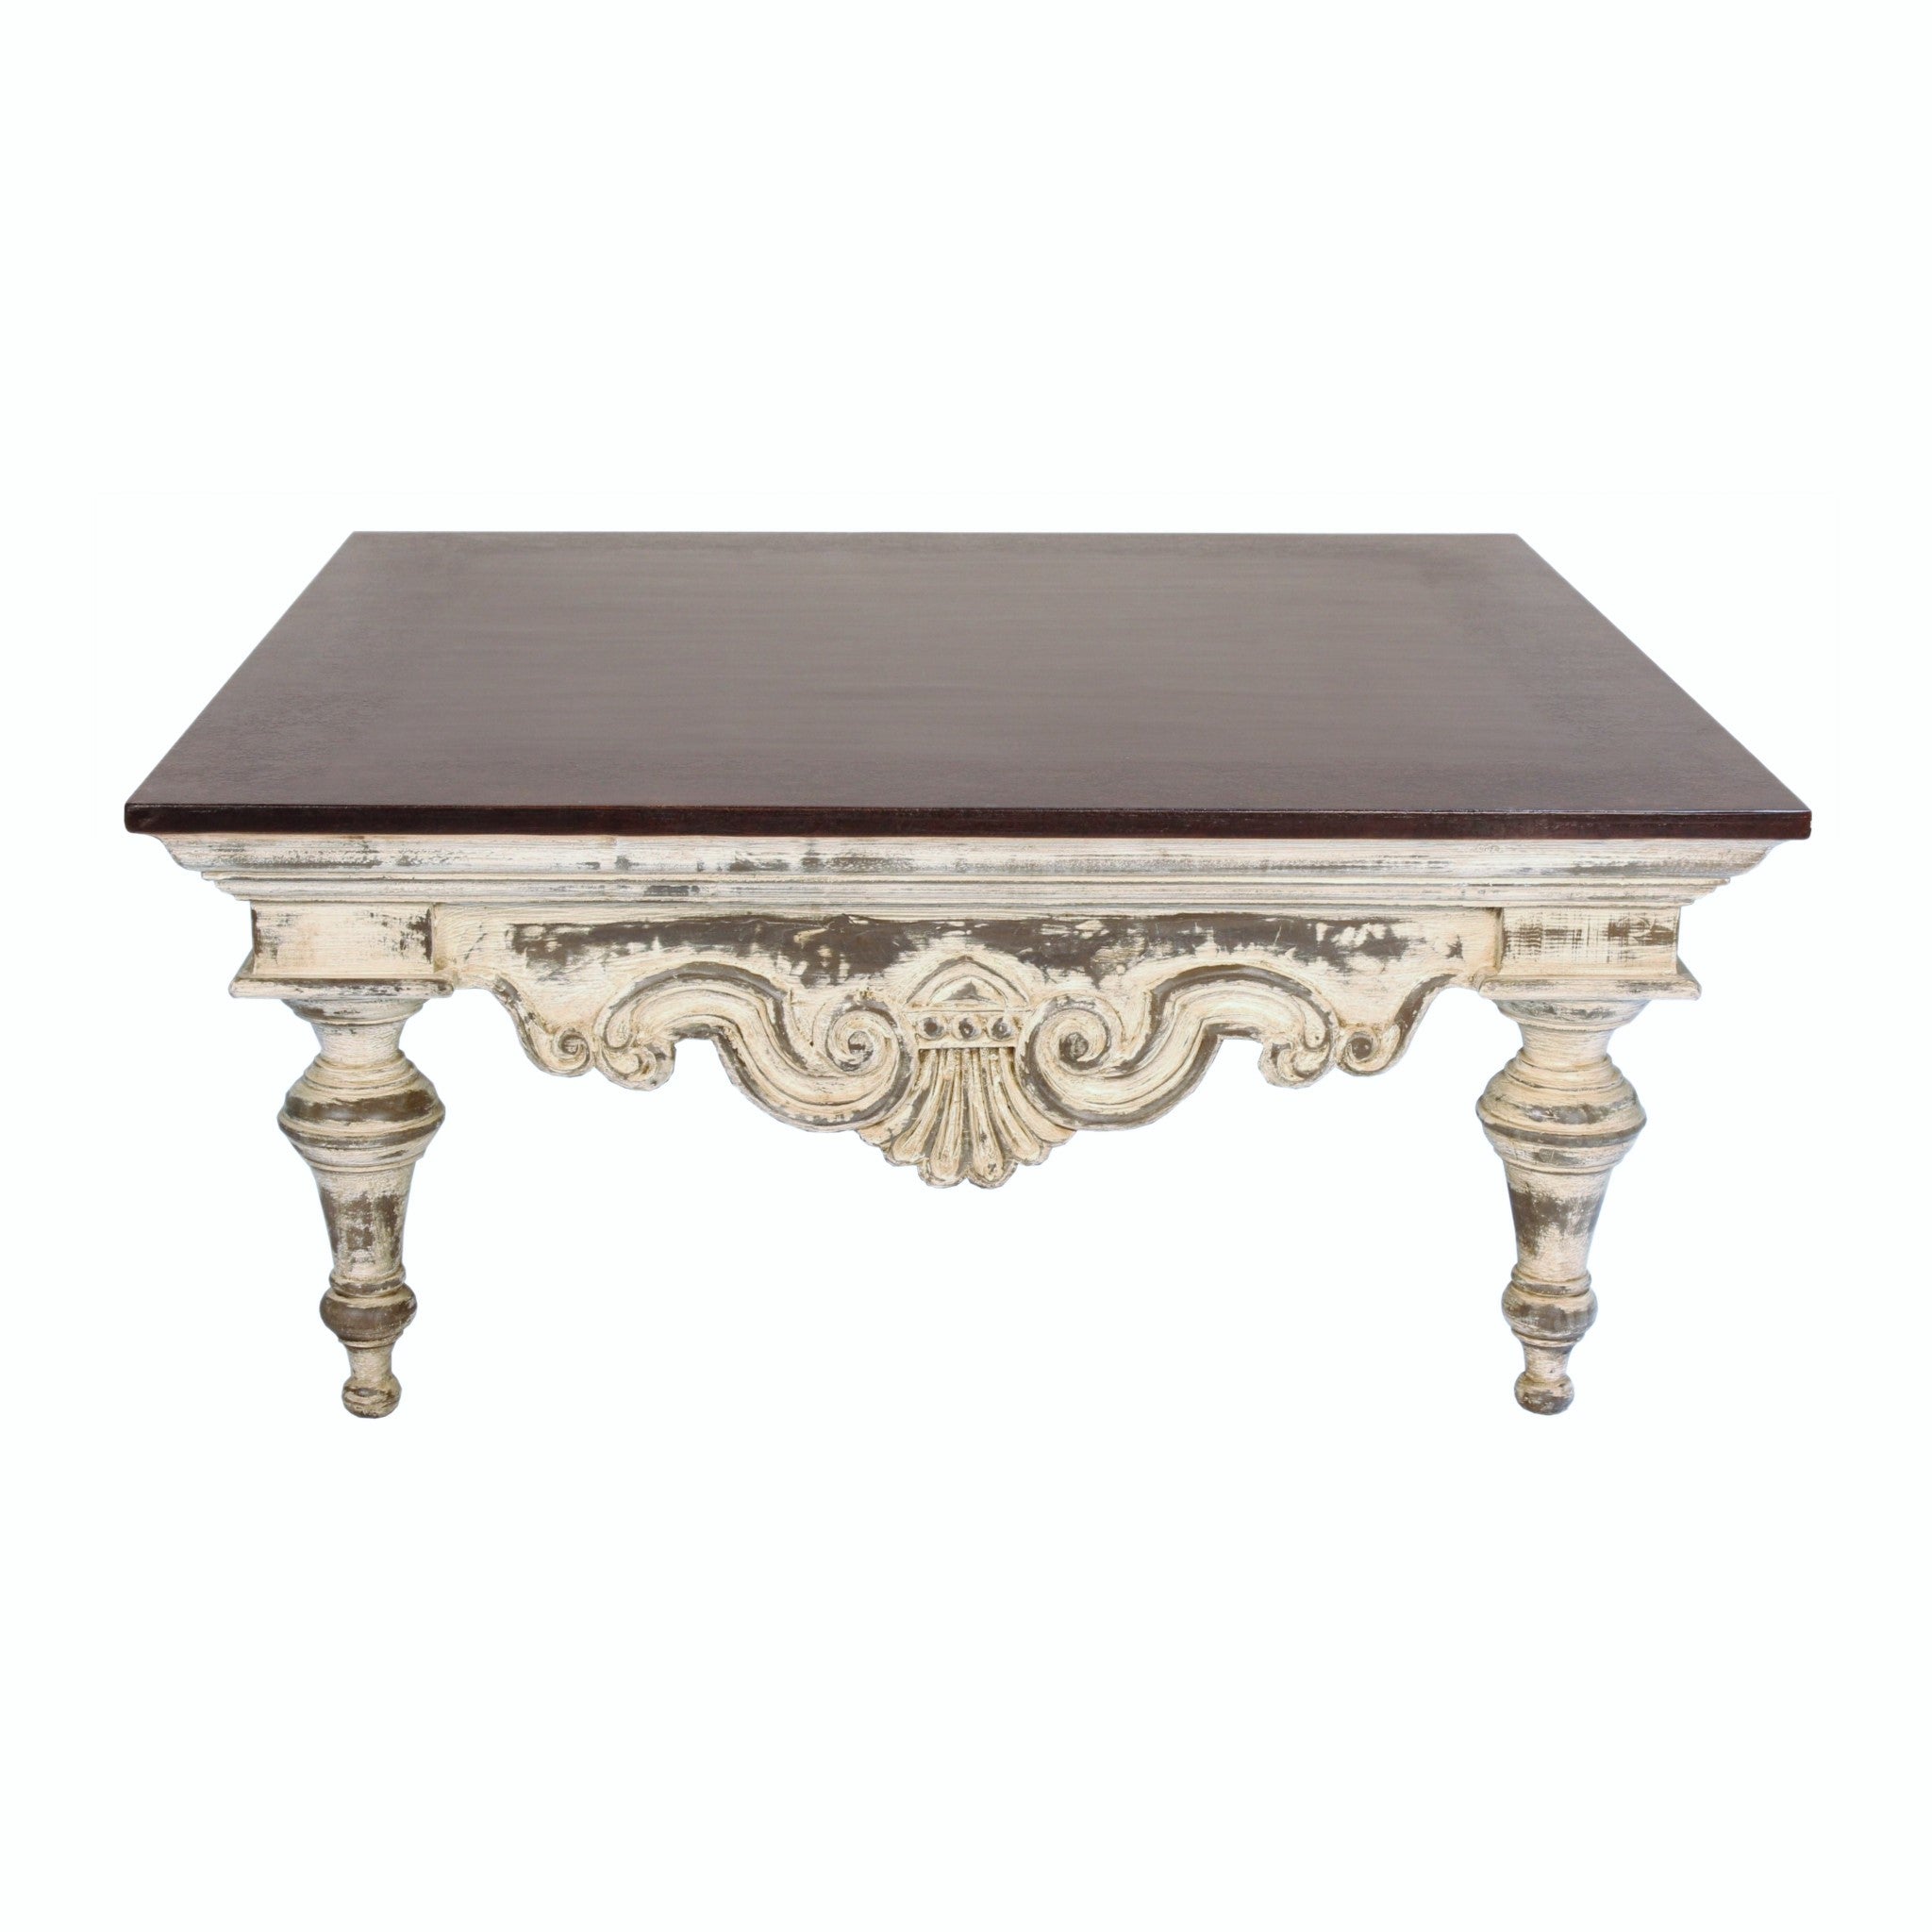 Peninsula Home Lemans French Cocktail Table Lc 010 1010 Sqr Tto